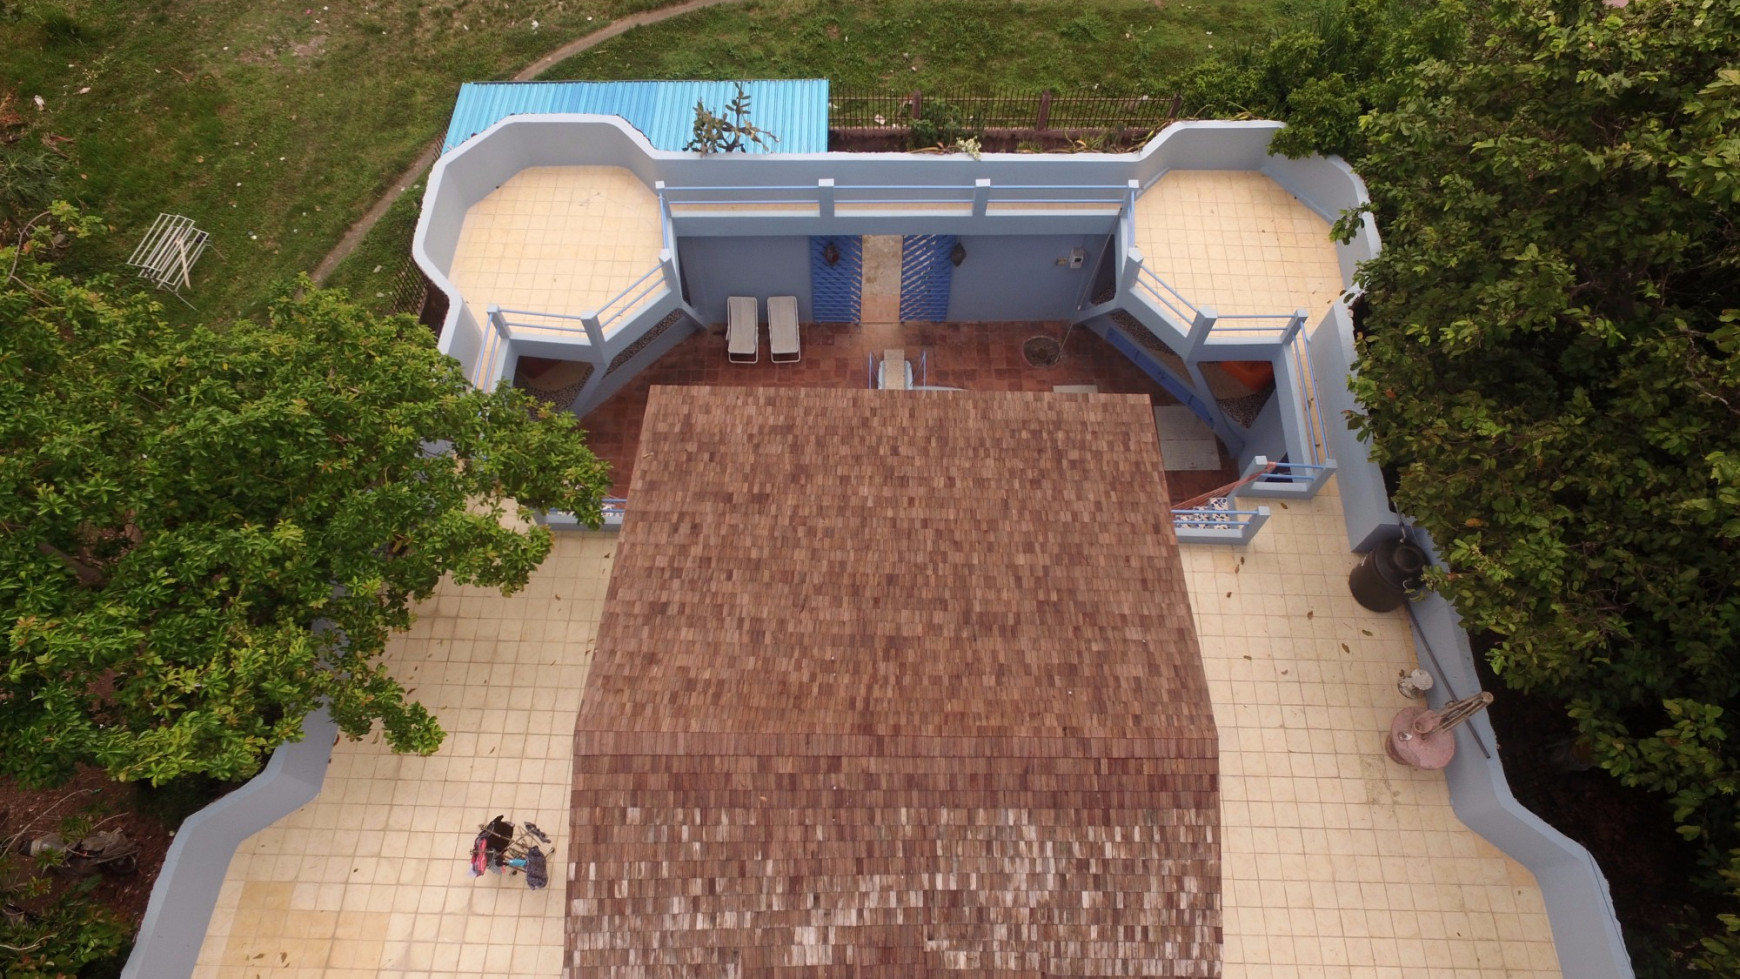 Unique villa for rent 5 minutes to the beach and 5 minutes to central Lovina